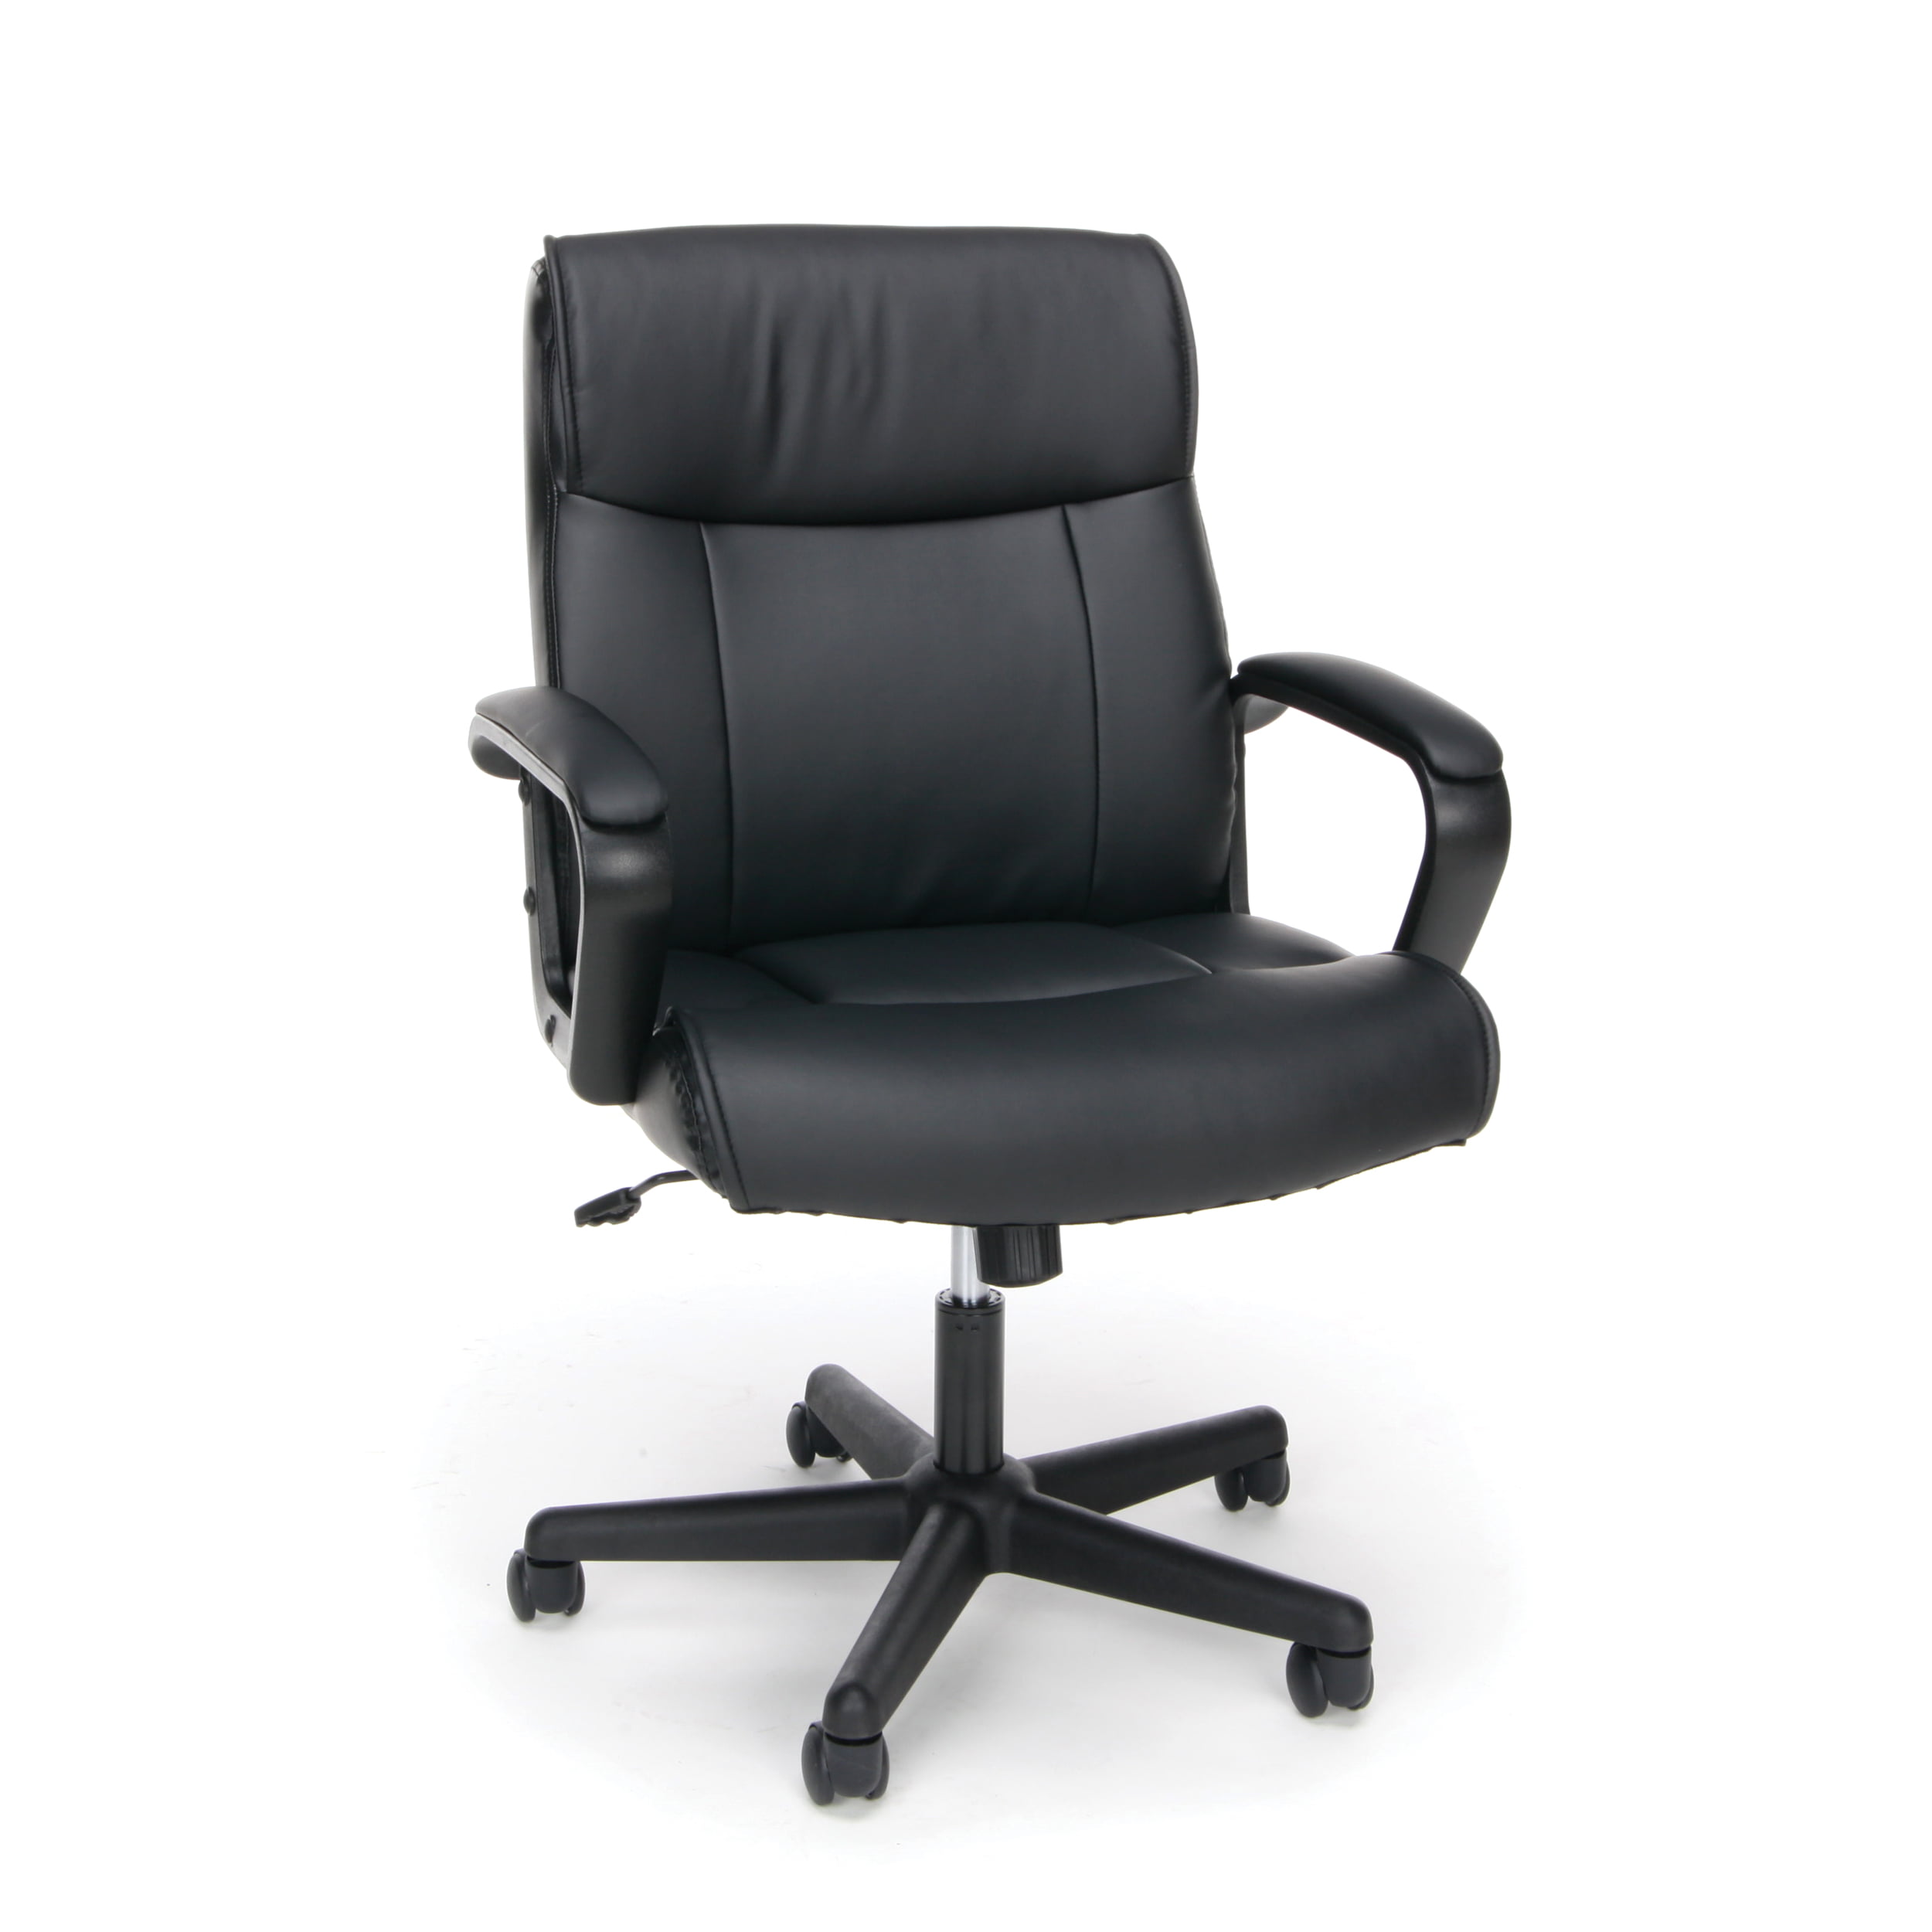 Ofm Essentials Collection Leather Office Chair With Arms In Black Ess 6010 Walmart Com Walmart Com